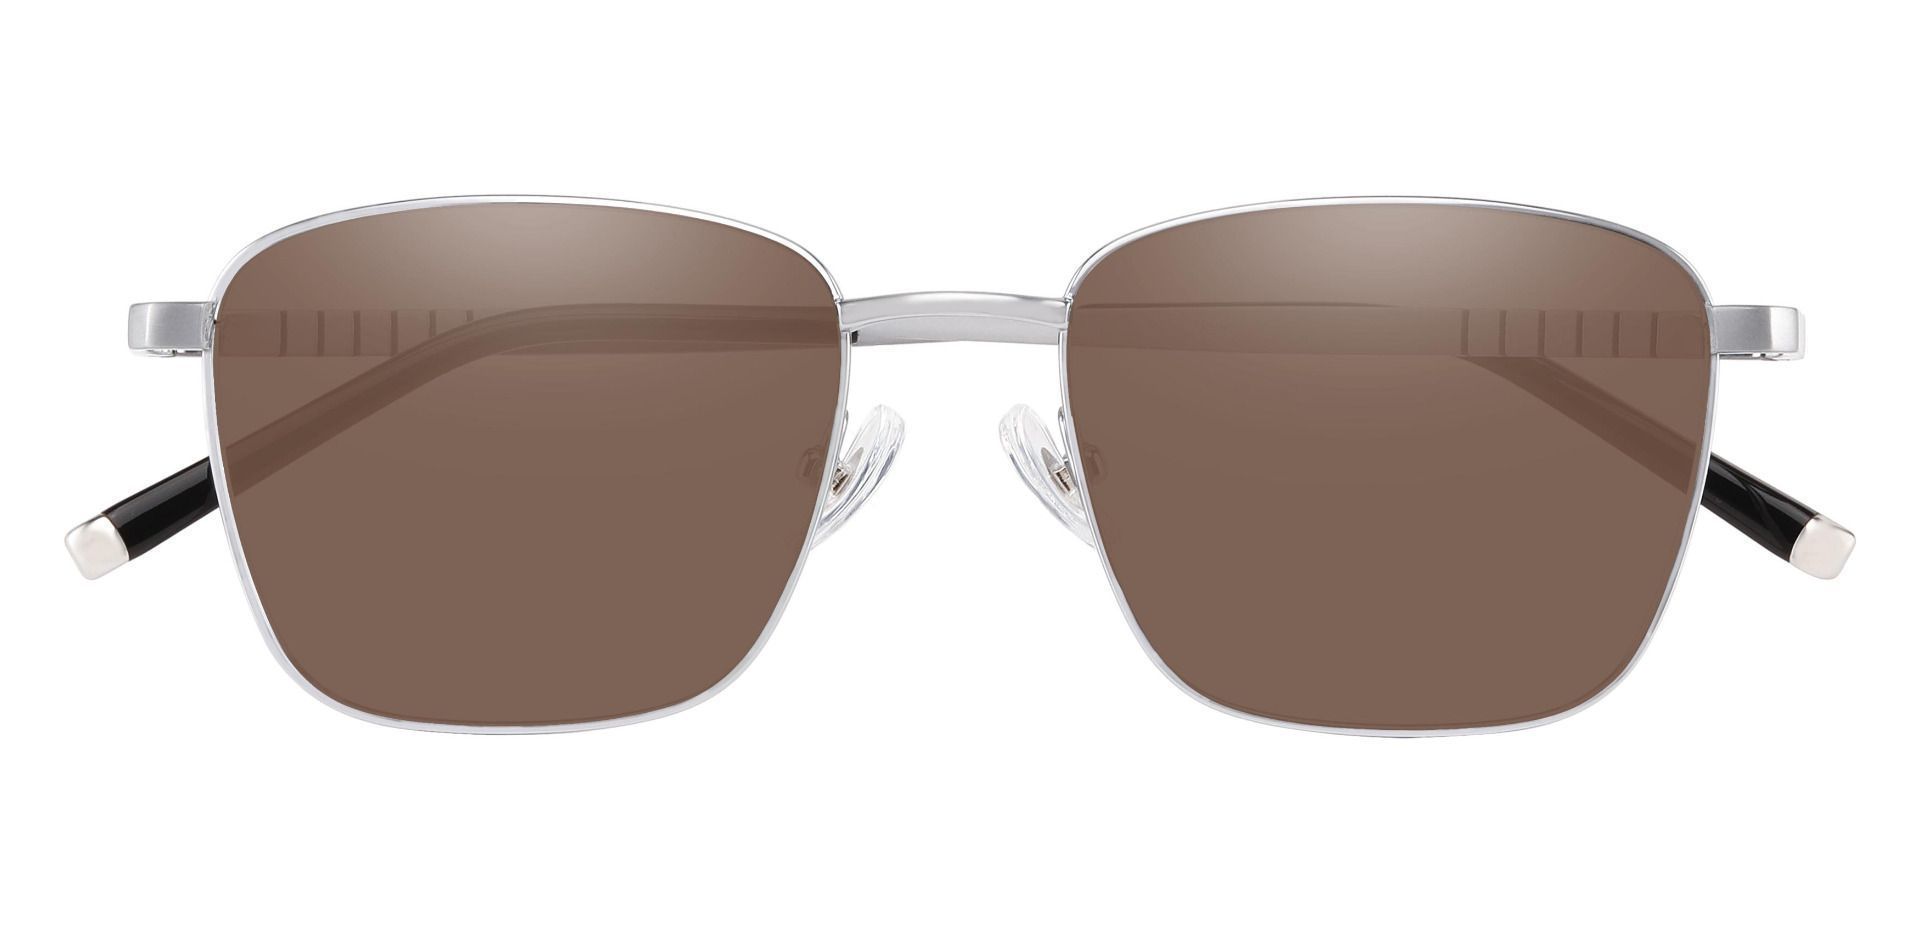 May Square Prescription Sunglasses - Silver Frame With Brown Lenses